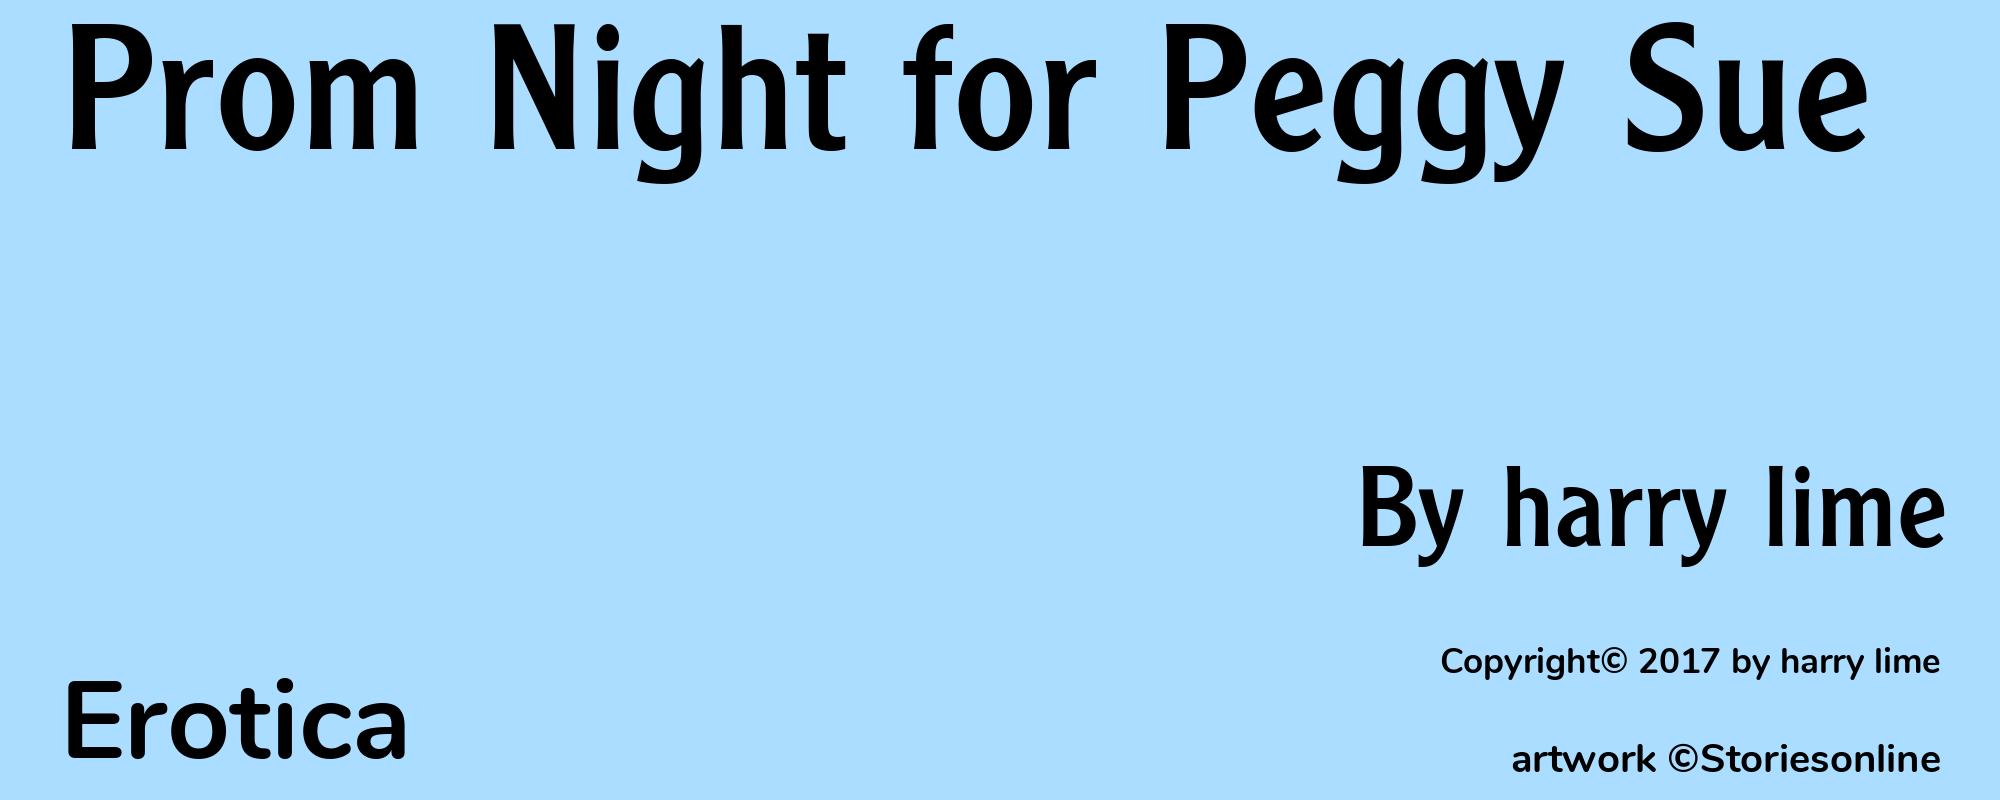 Prom Night for Peggy Sue - Cover